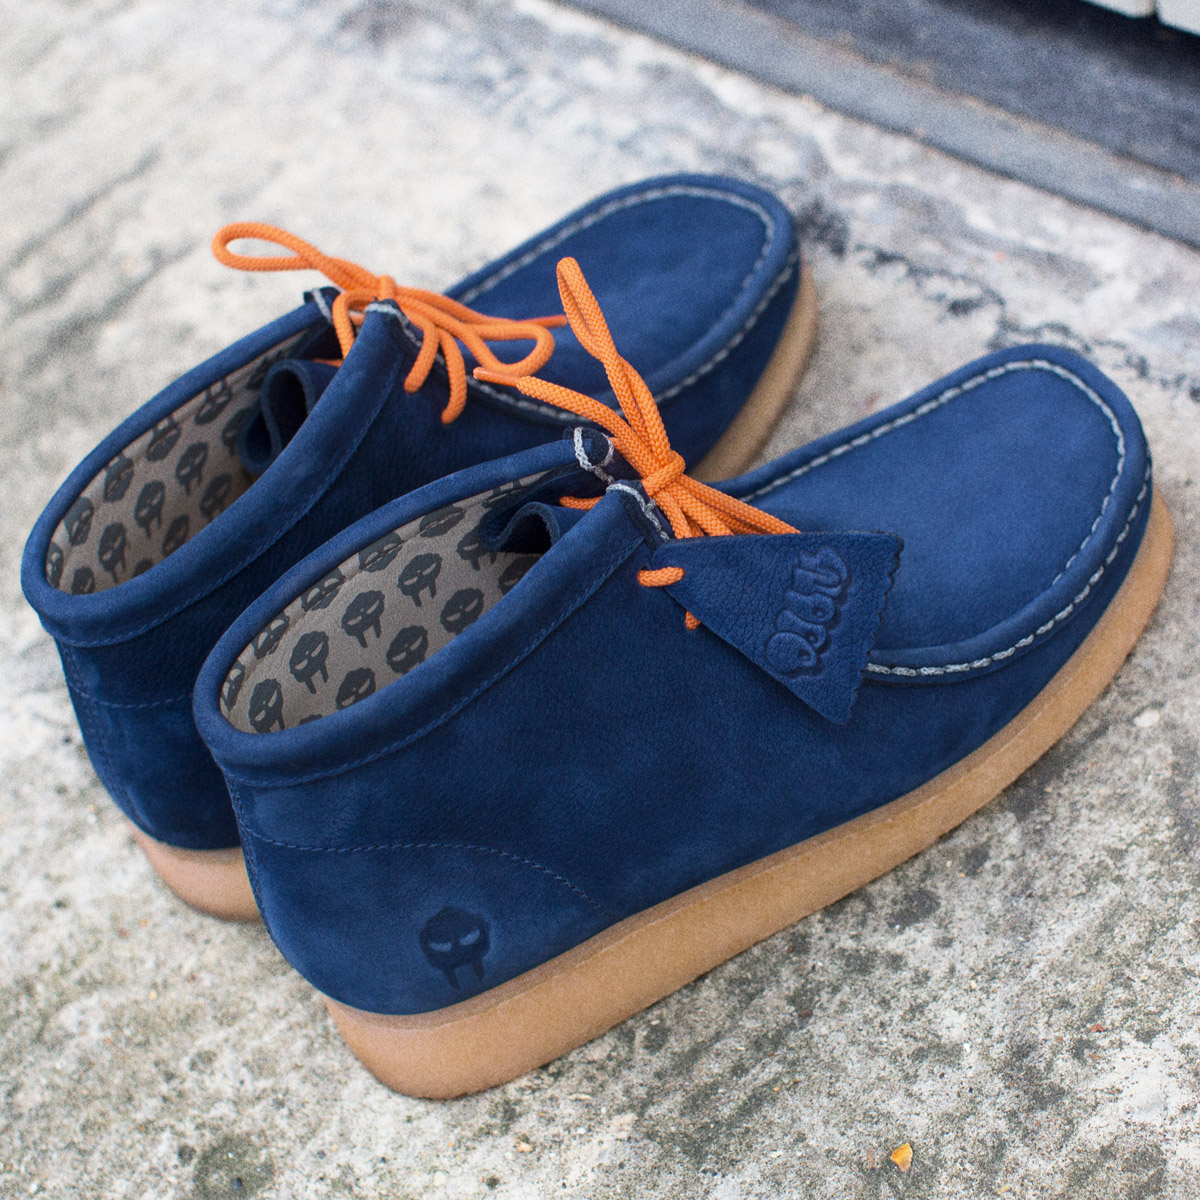 Clarks Limited Edition - COOL HUNTING®